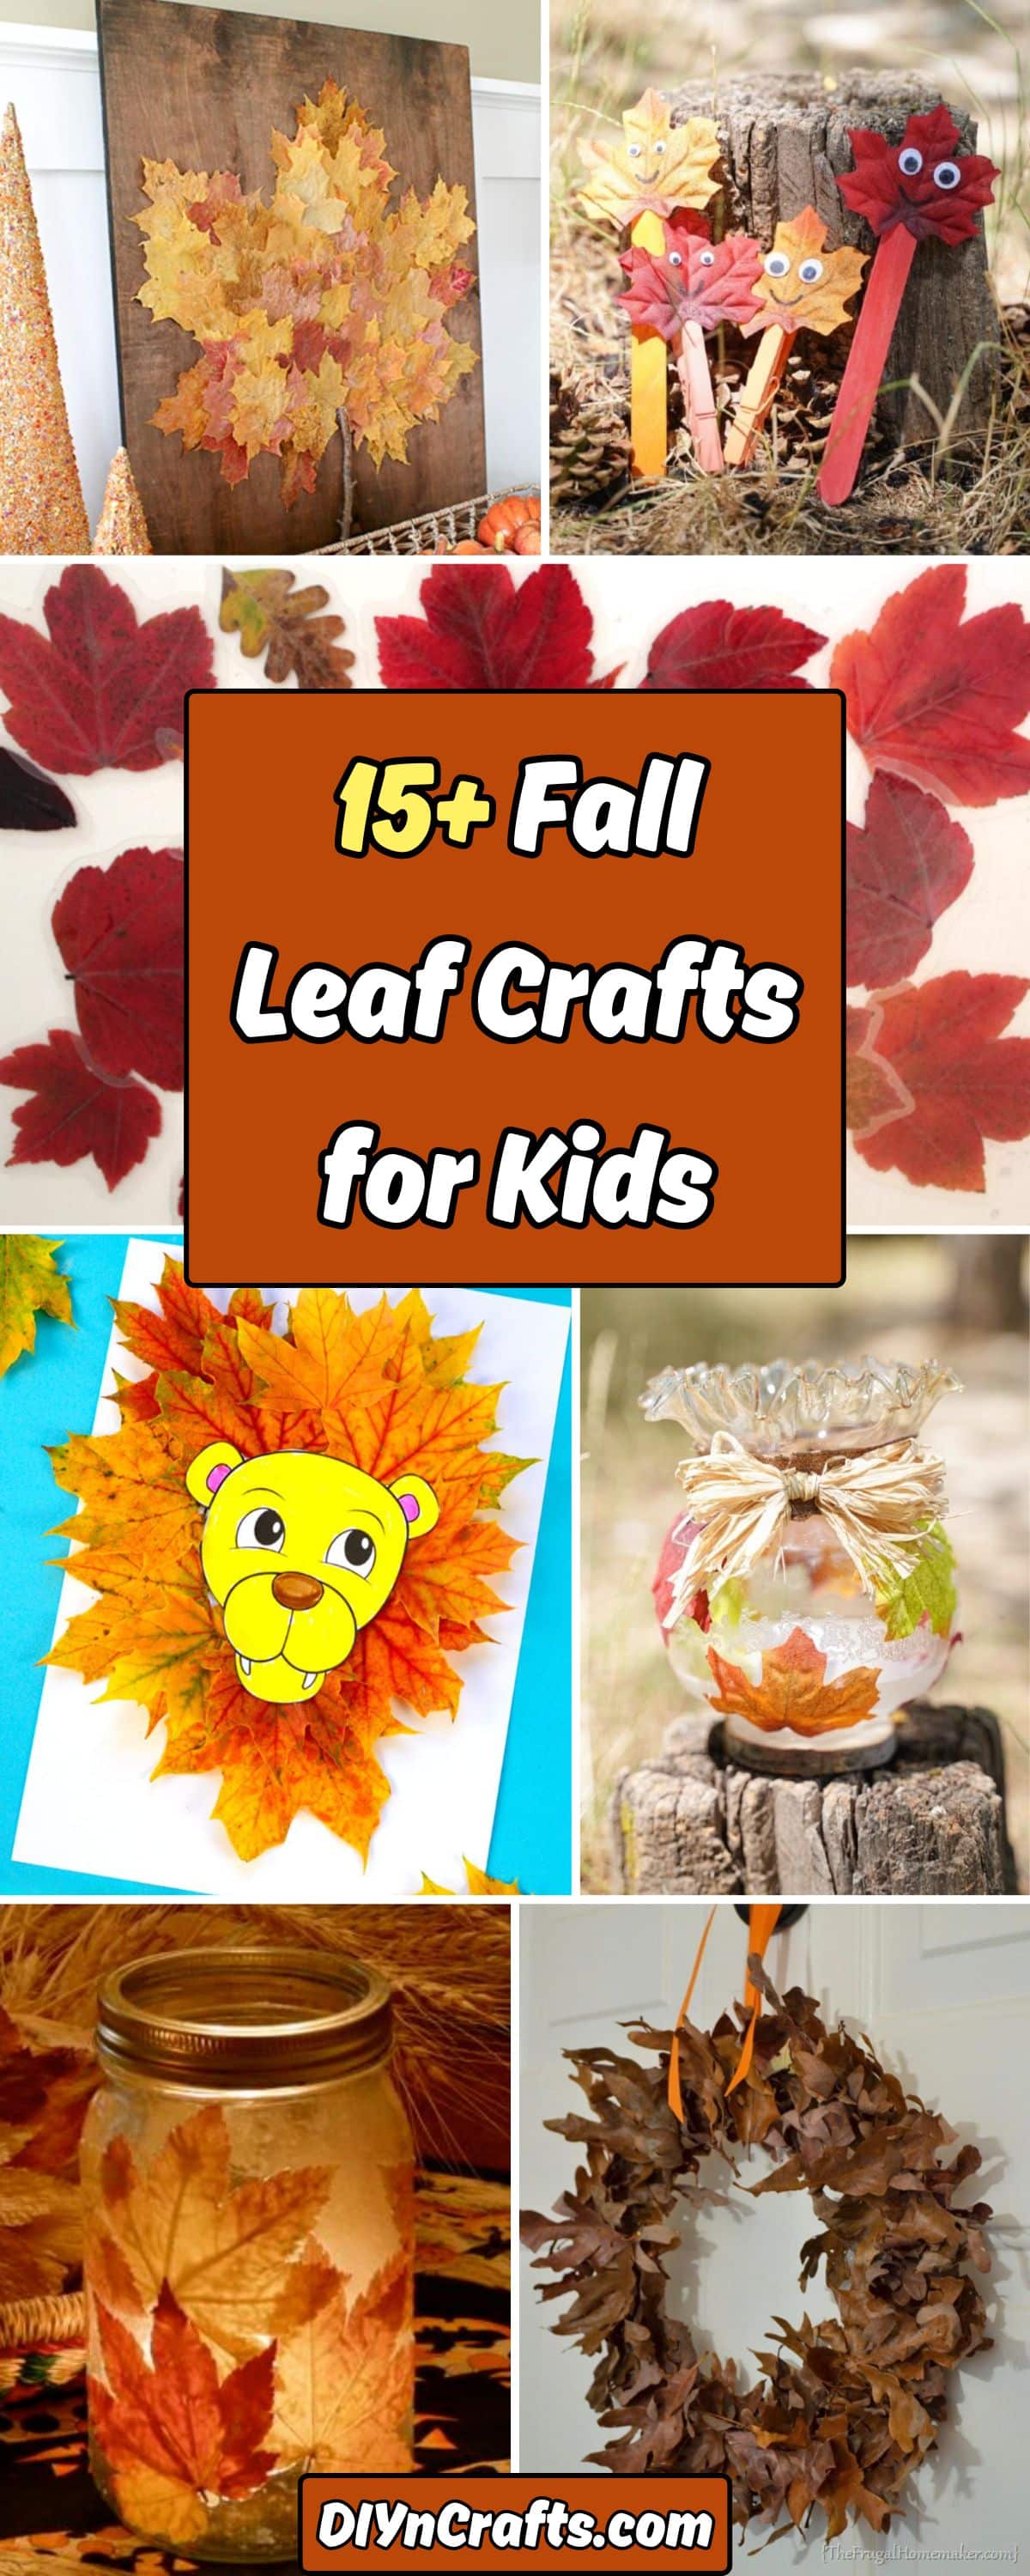 15+ Fabulous Fall Leaf Crafts for Kids collage.